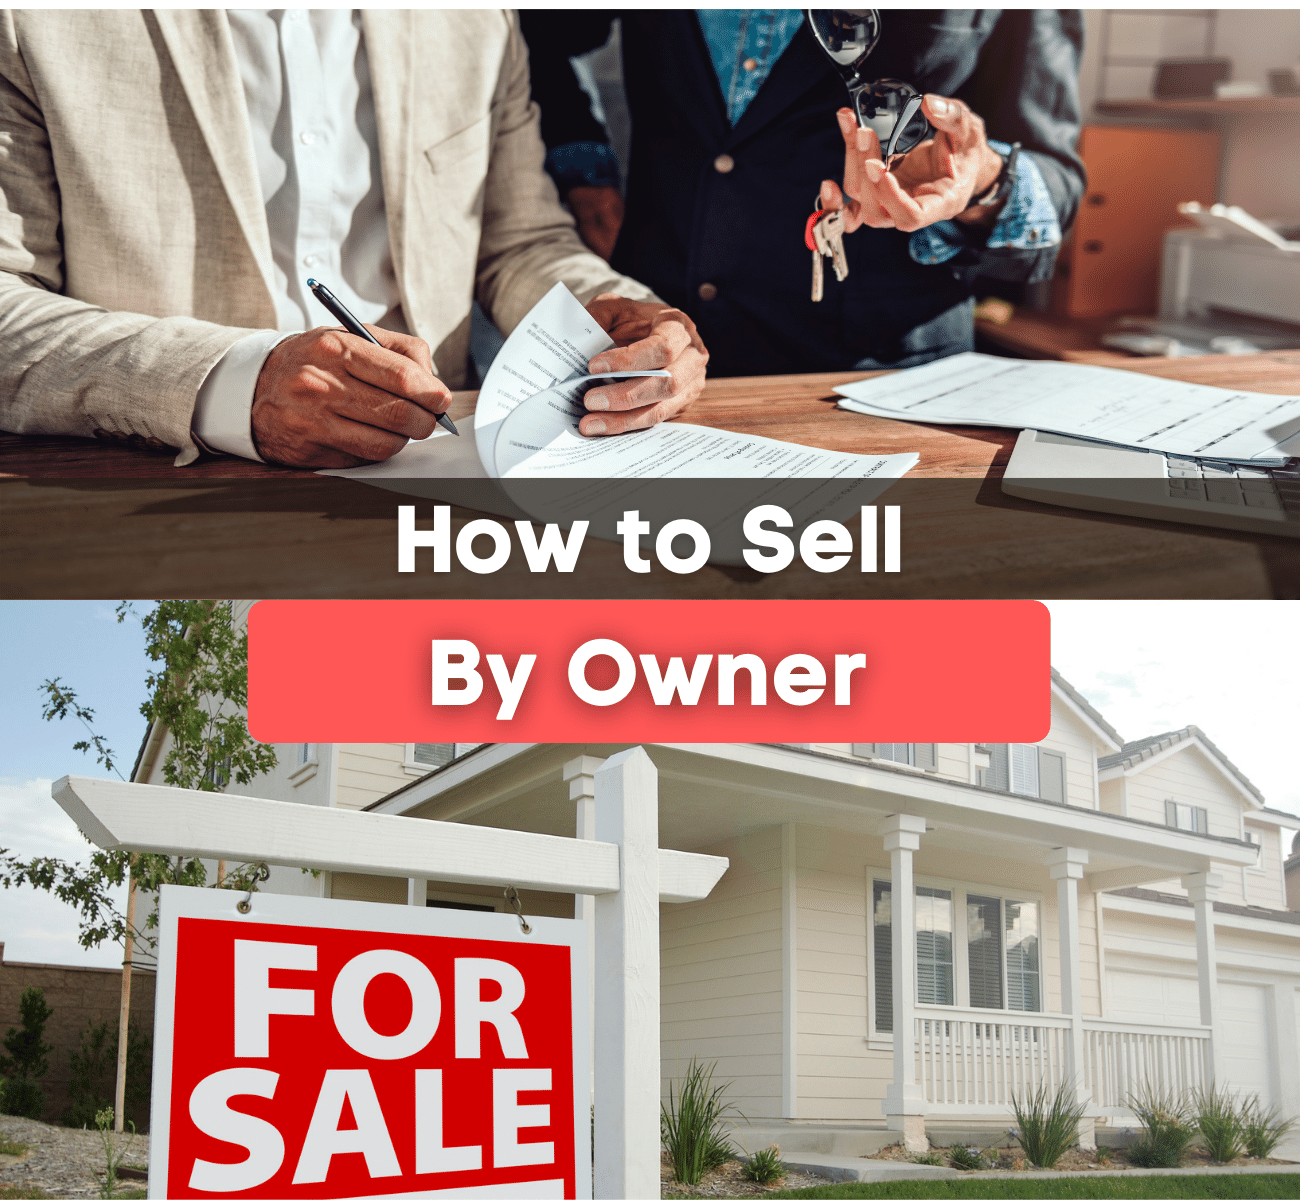 How to Sell Homes For Sale By Owner